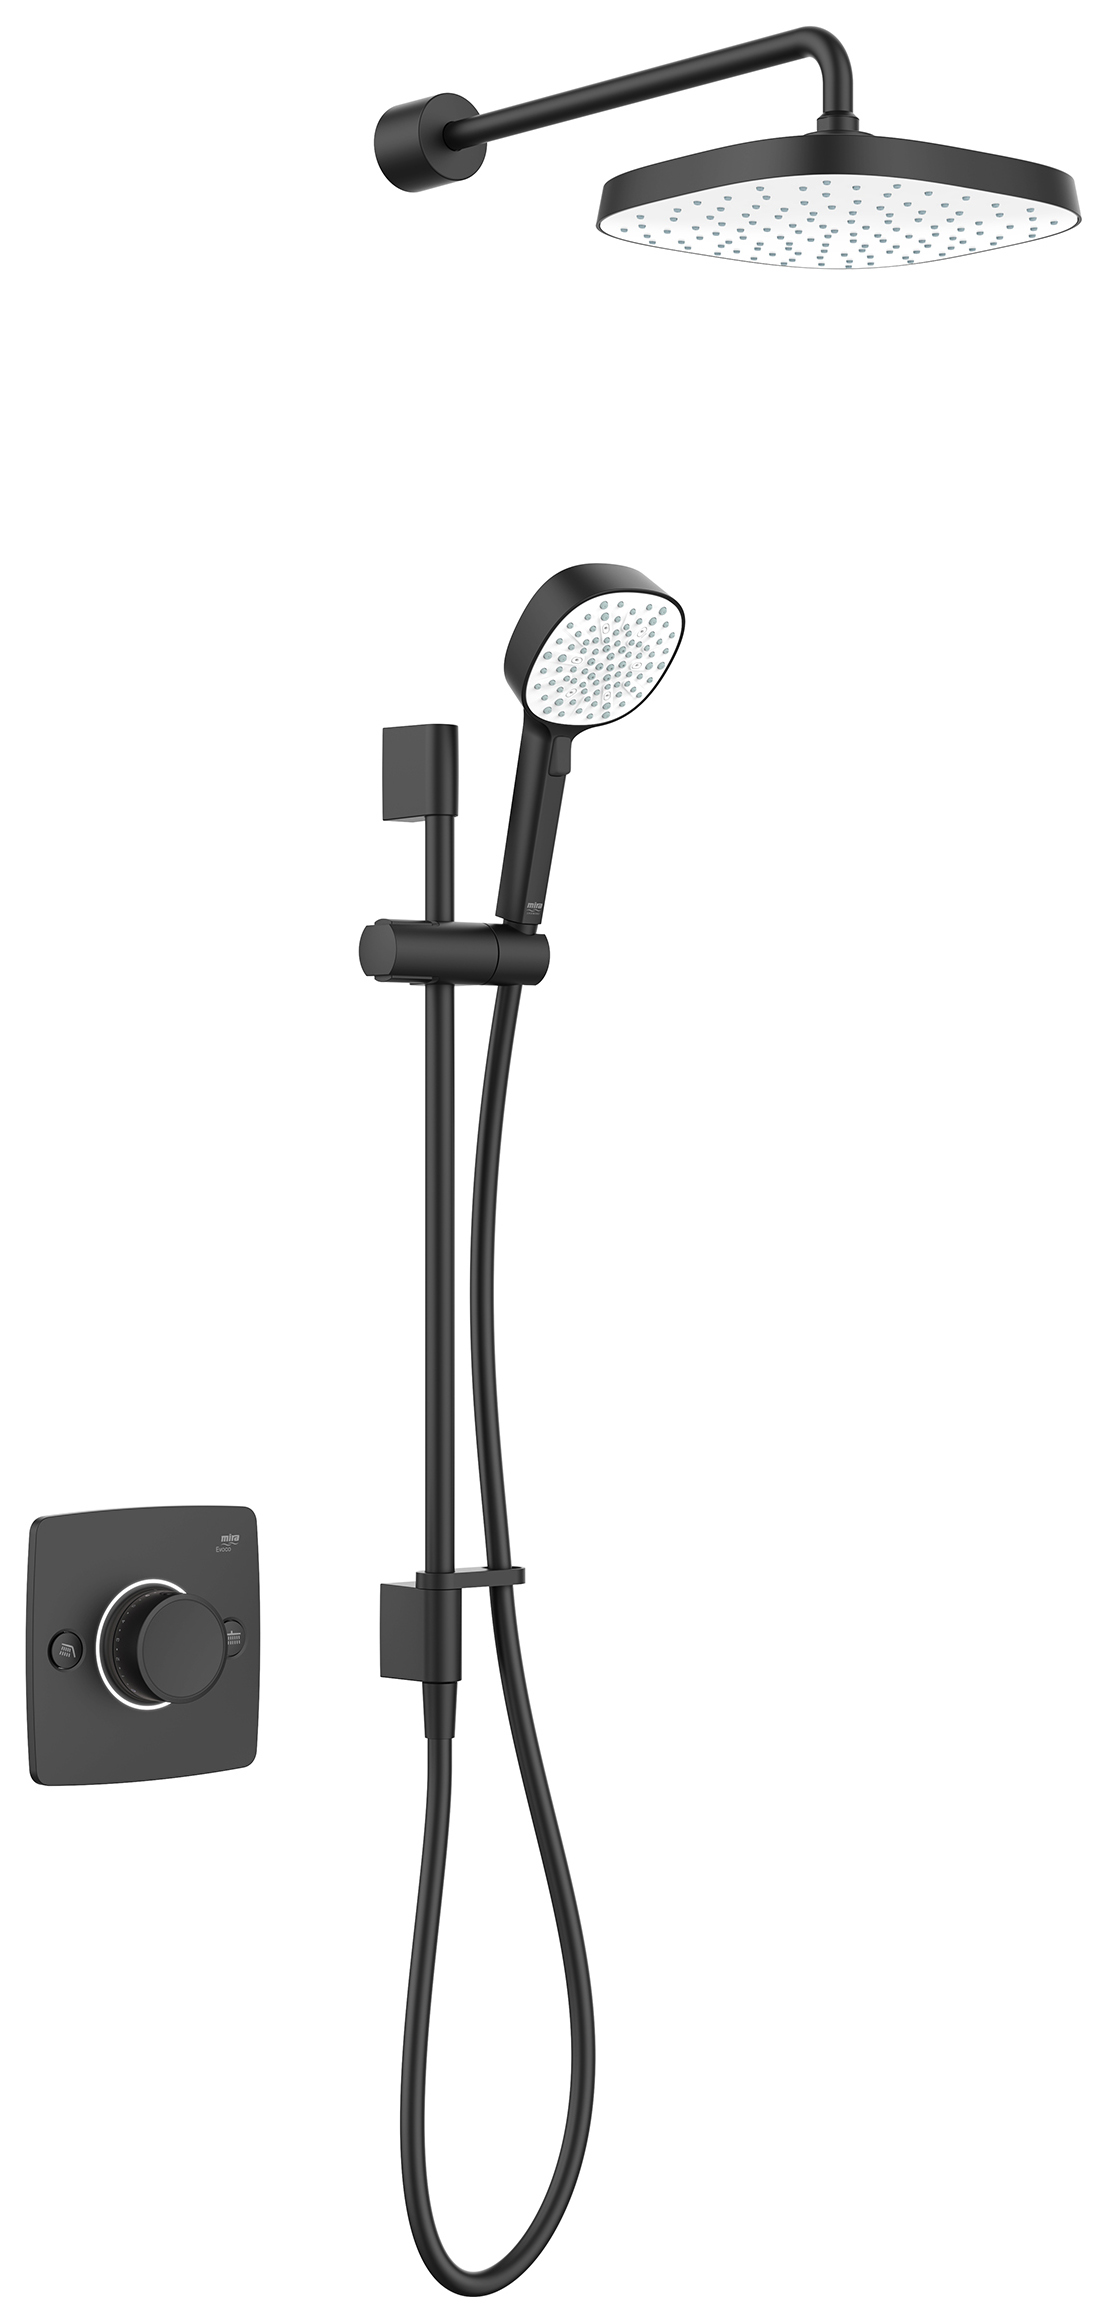 Mira Evoco Dual Outlet Thermostatic Mixer Shower with HydroGlo Technology - Matt Black